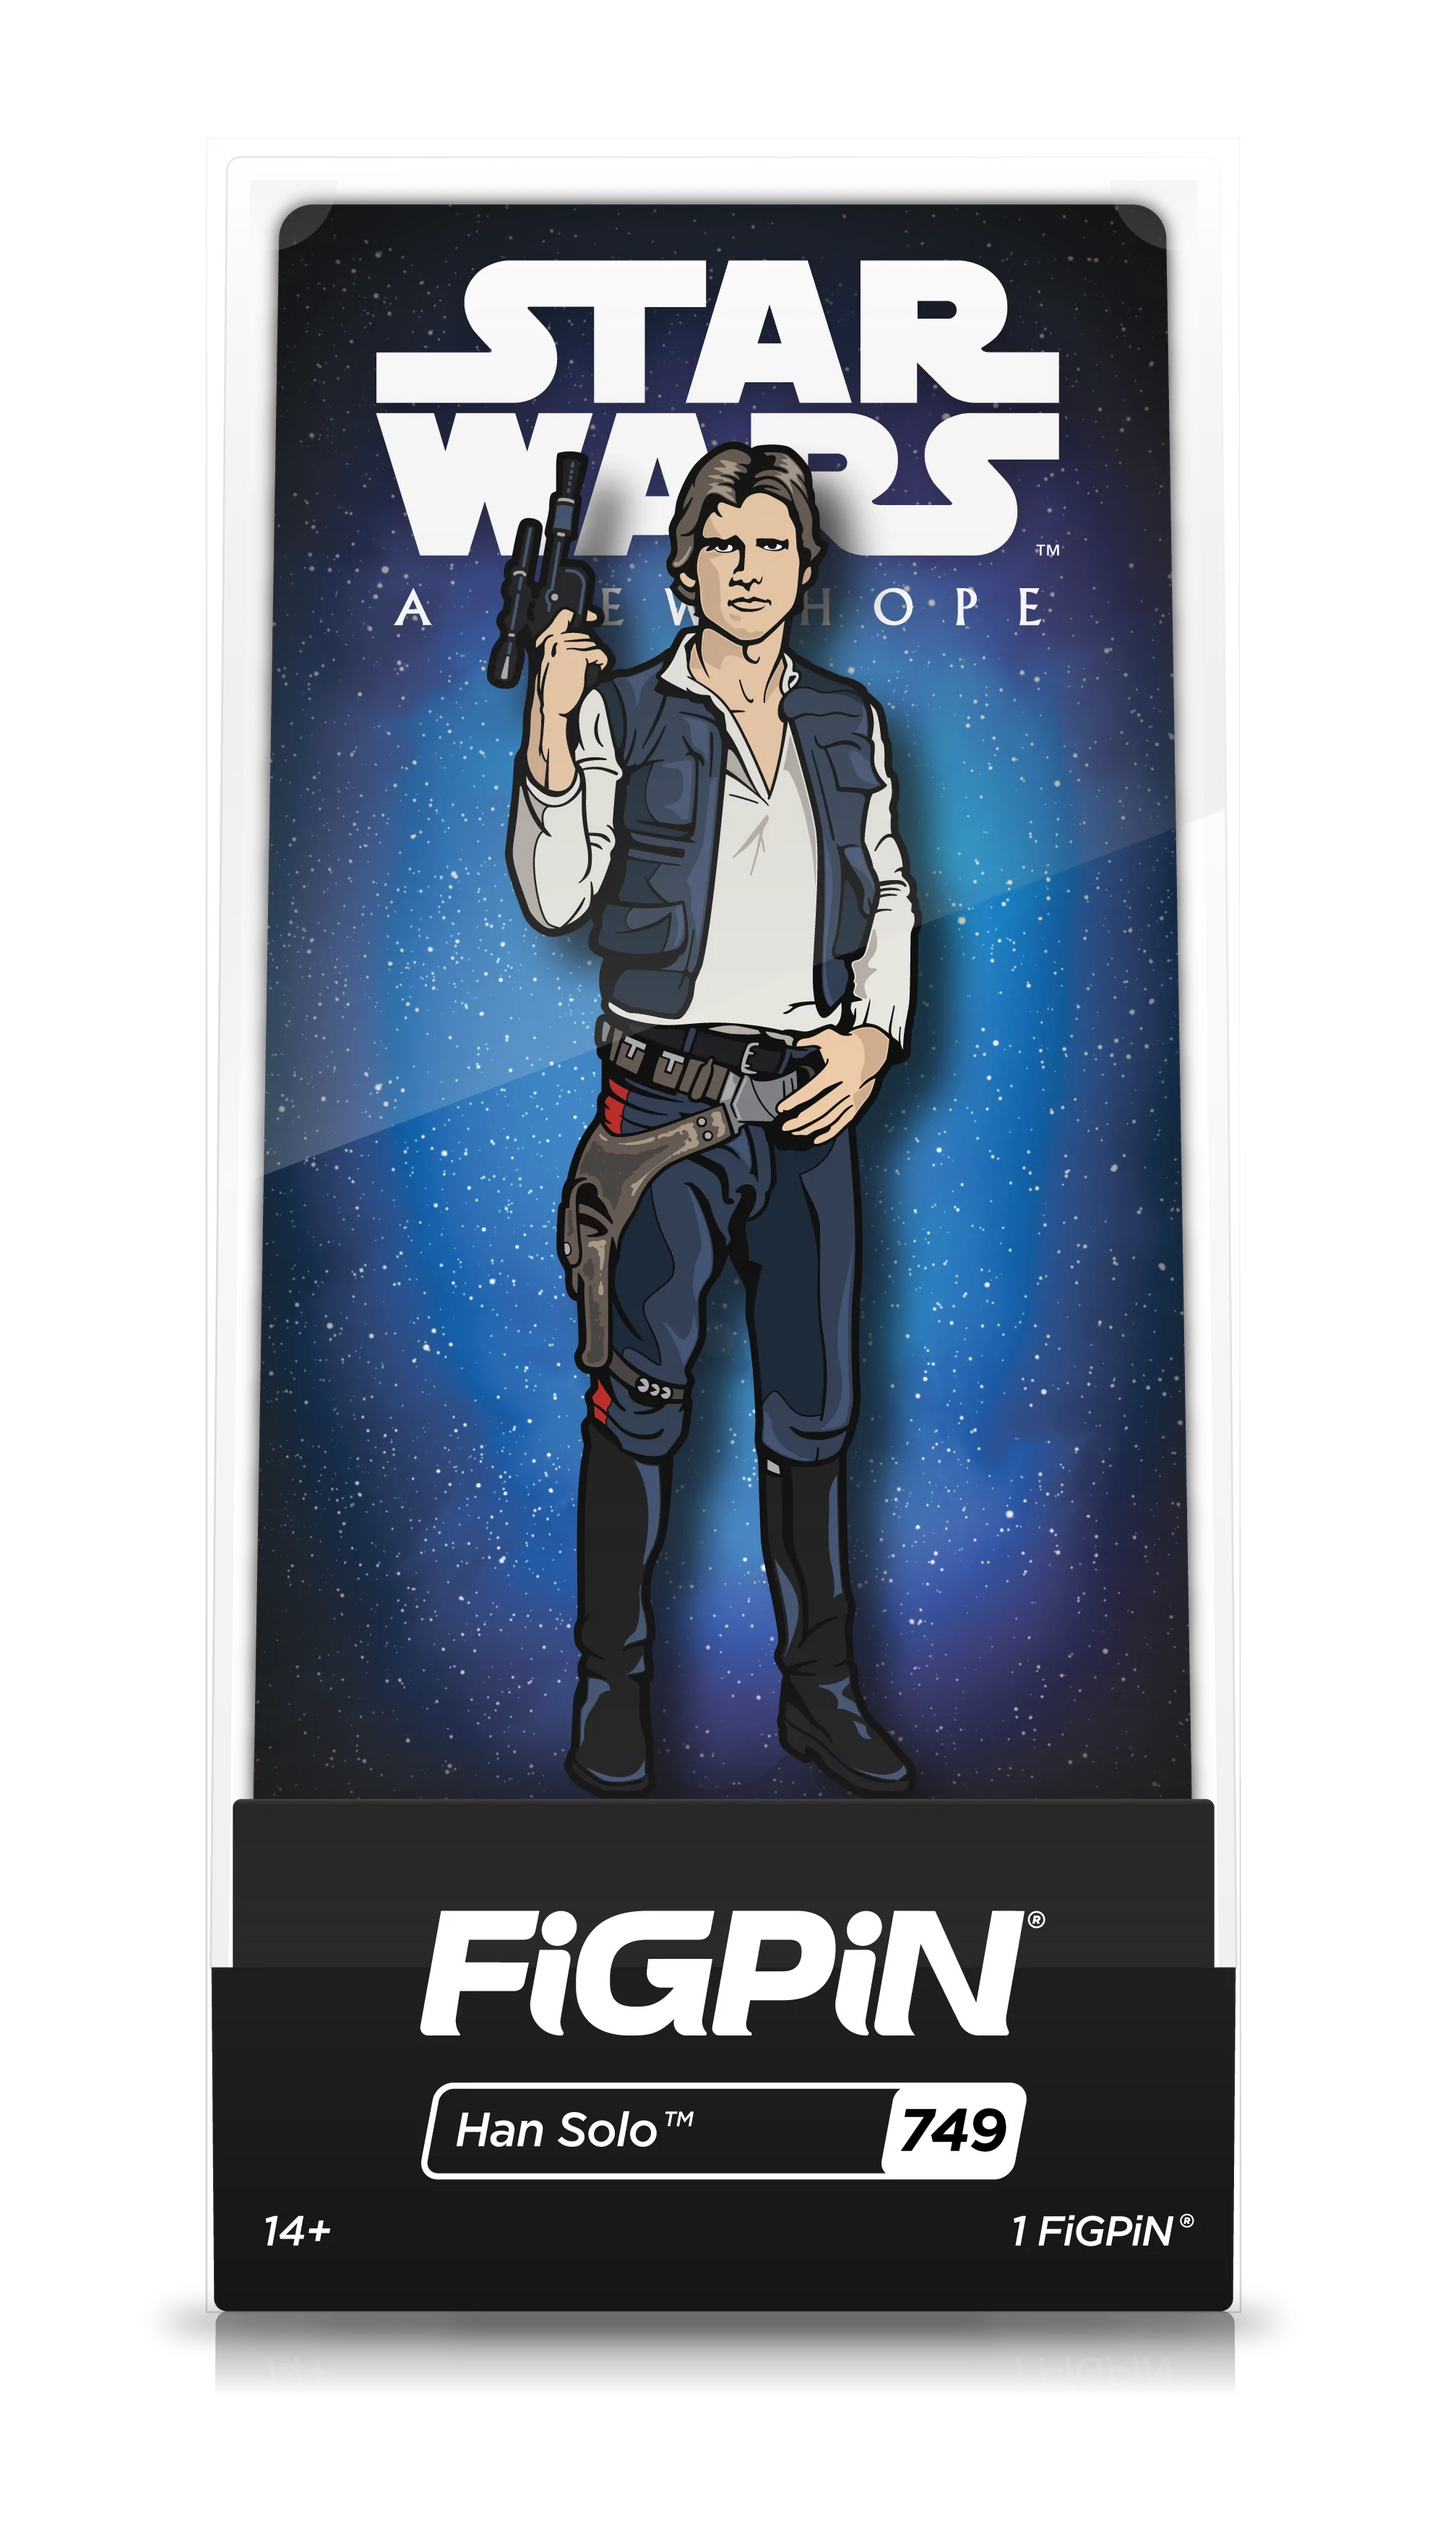 FiGPiN Han Solo (749) Property: Star Wars A New Hope